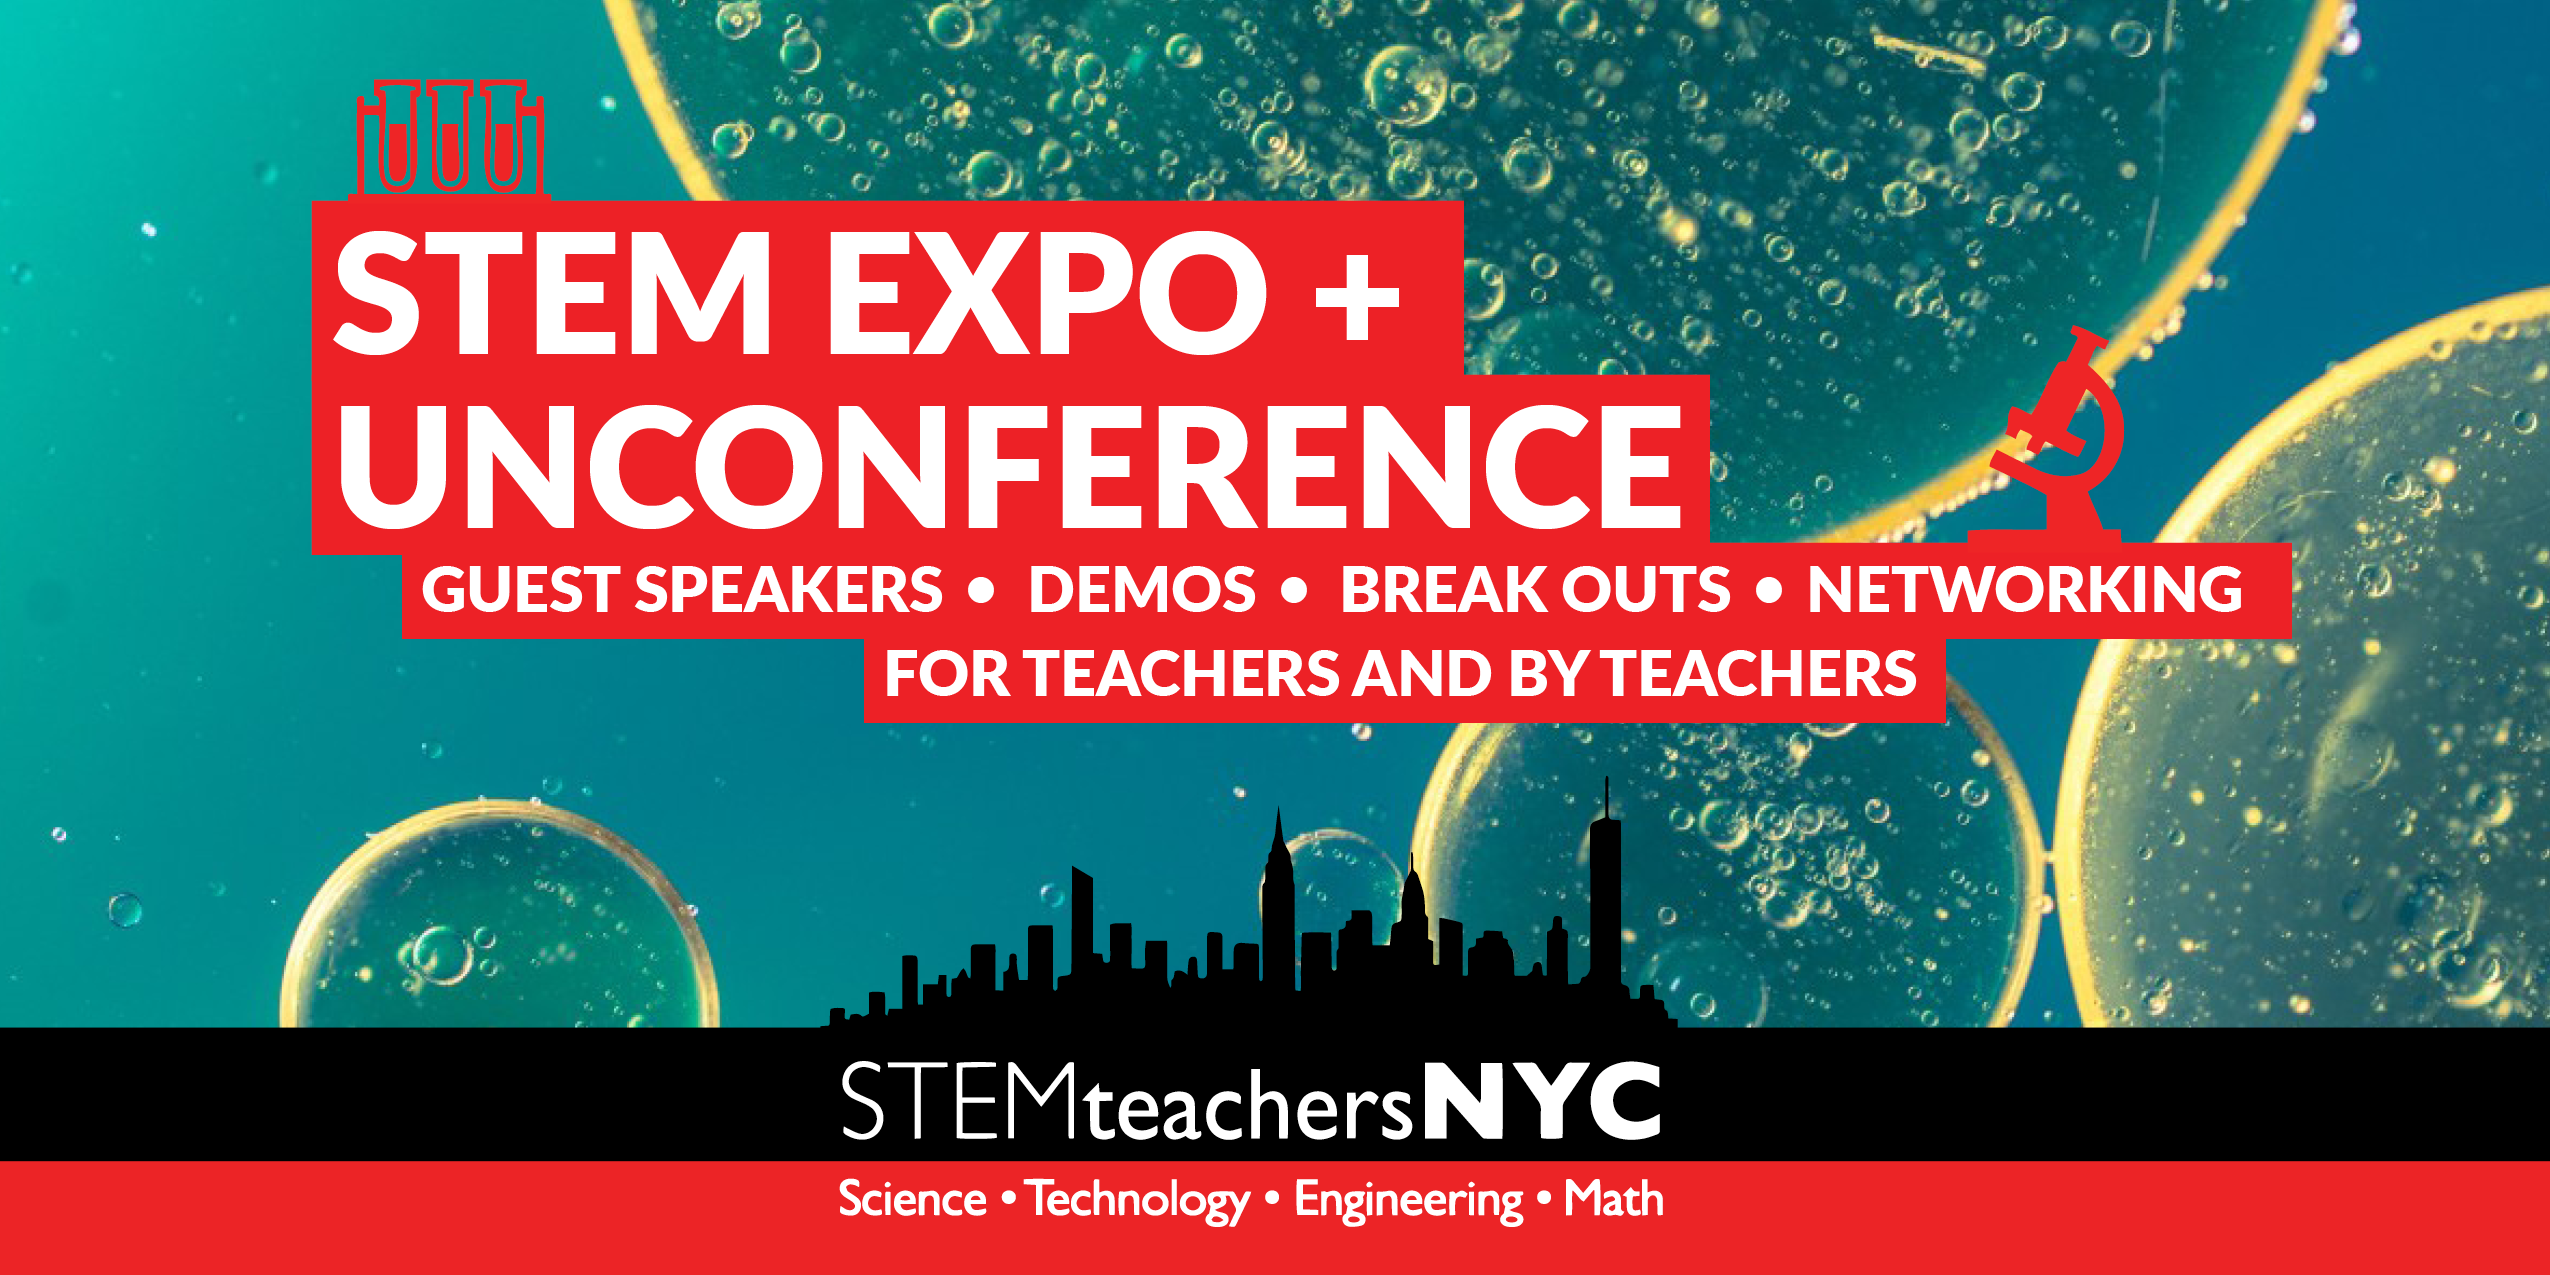 STEMteachersNYC Annual Meeting and Expo